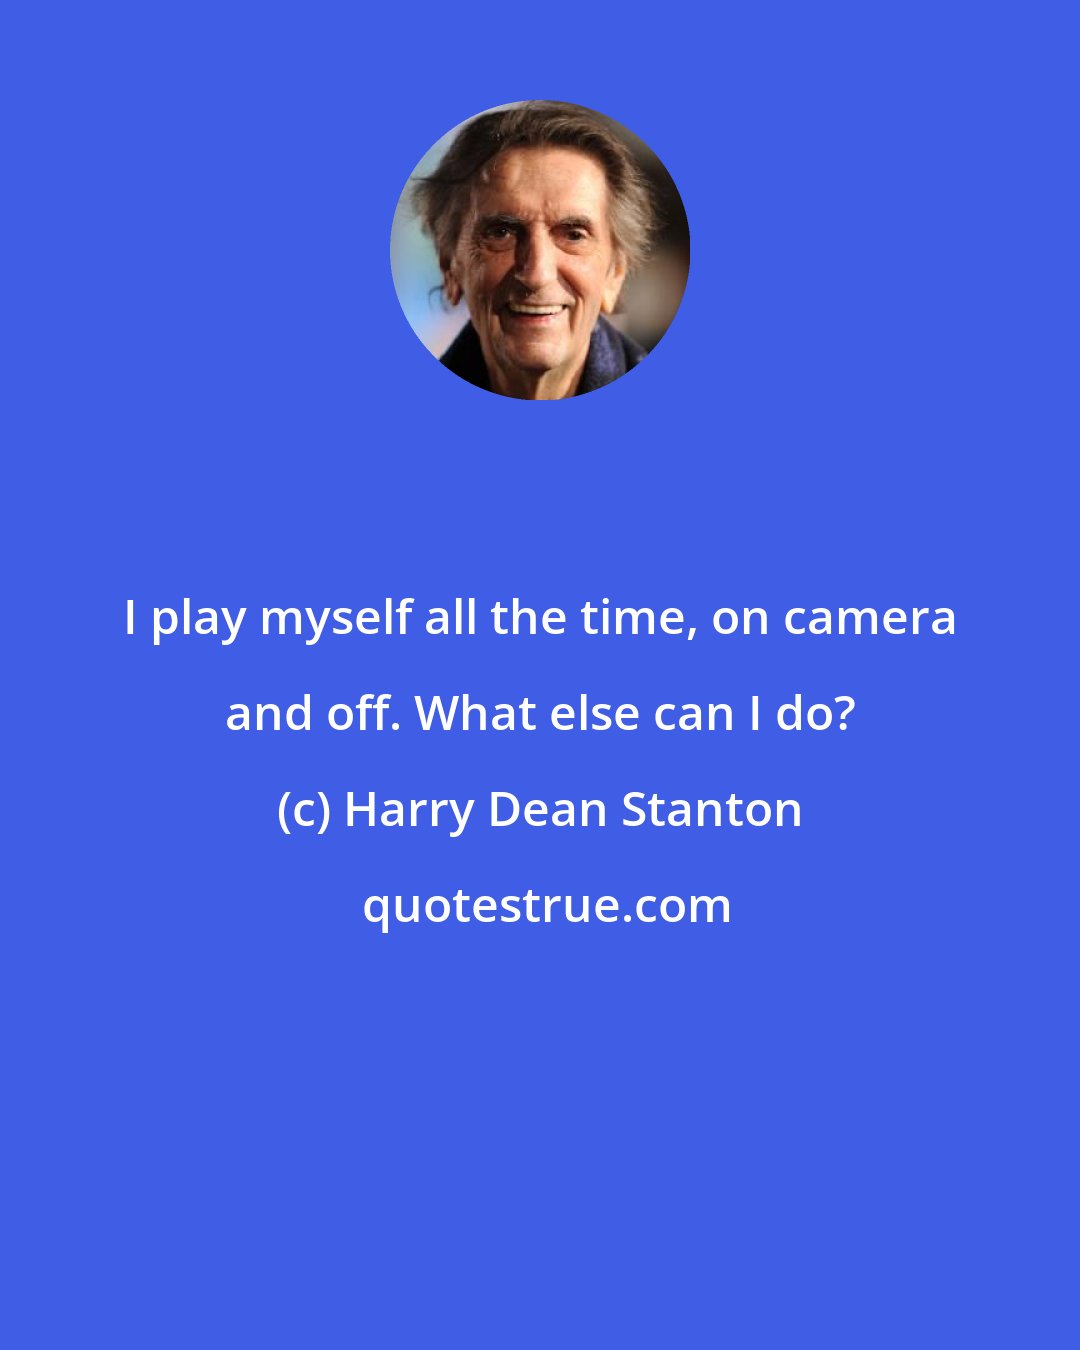 Harry Dean Stanton: I play myself all the time, on camera and off. What else can I do?